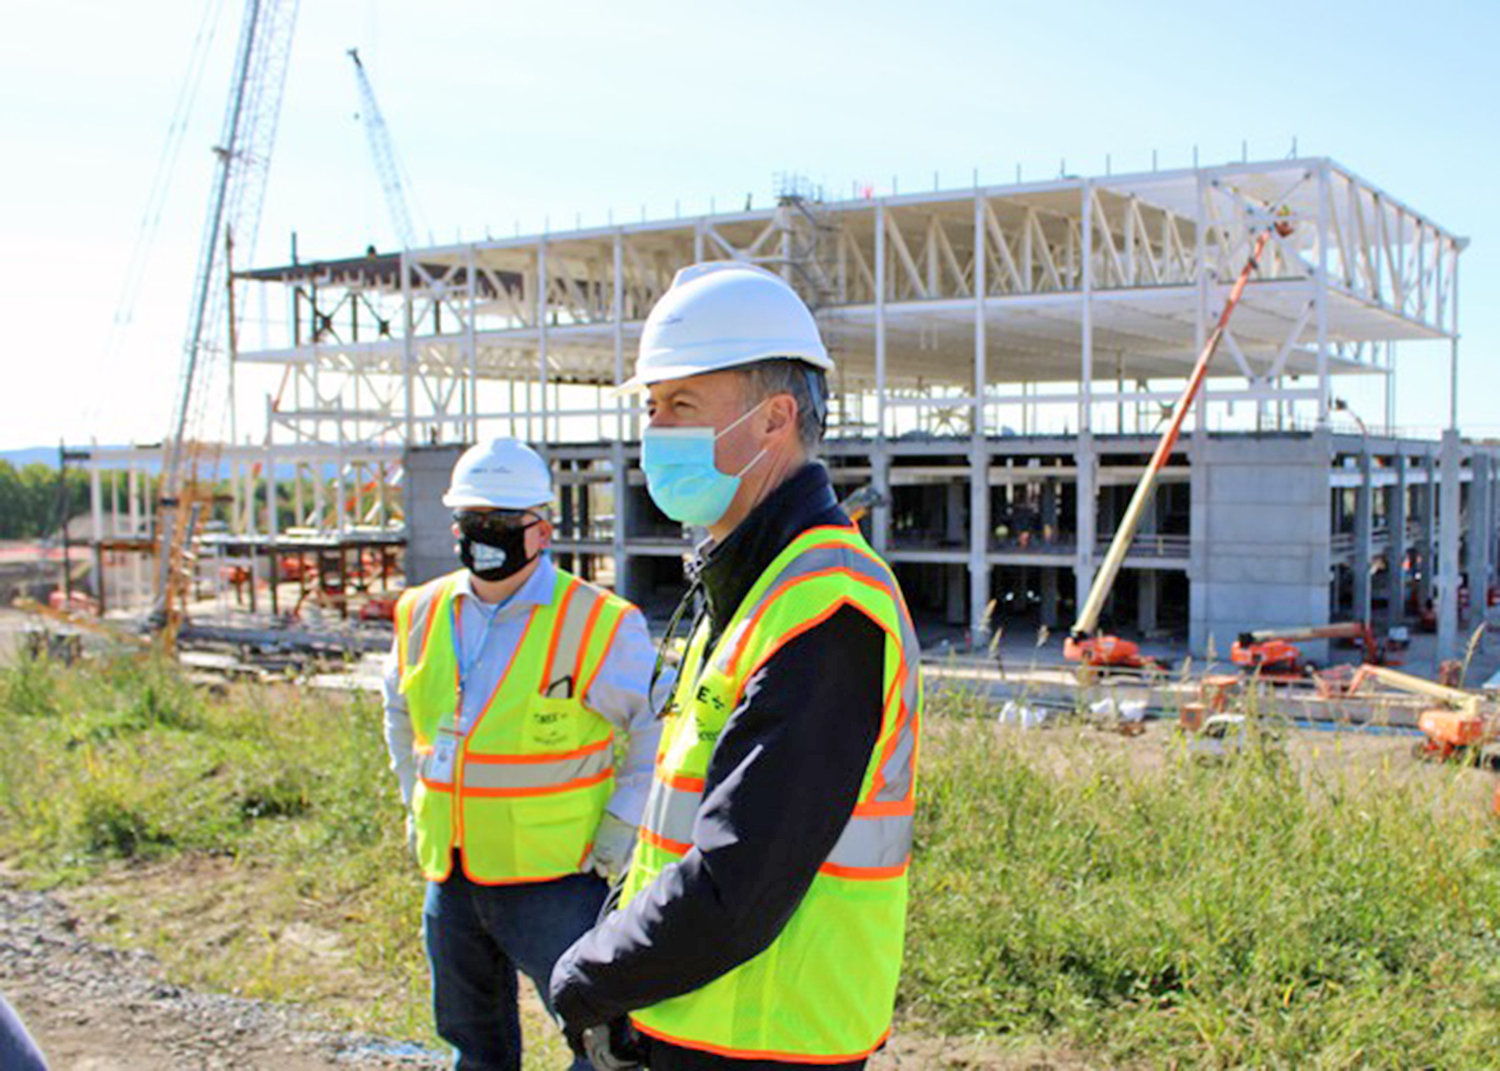 ON-SITE — Jeff Maidment, construction manager at Cree, and company president and CEO Gregg Lowe stand at the site of the Cree Inc. silicon carbide wafer factory under construction in Marcy on Friday. The billion-dollar fabrication facility is on schedule for occupancy this spring and production about a year later, the company says.